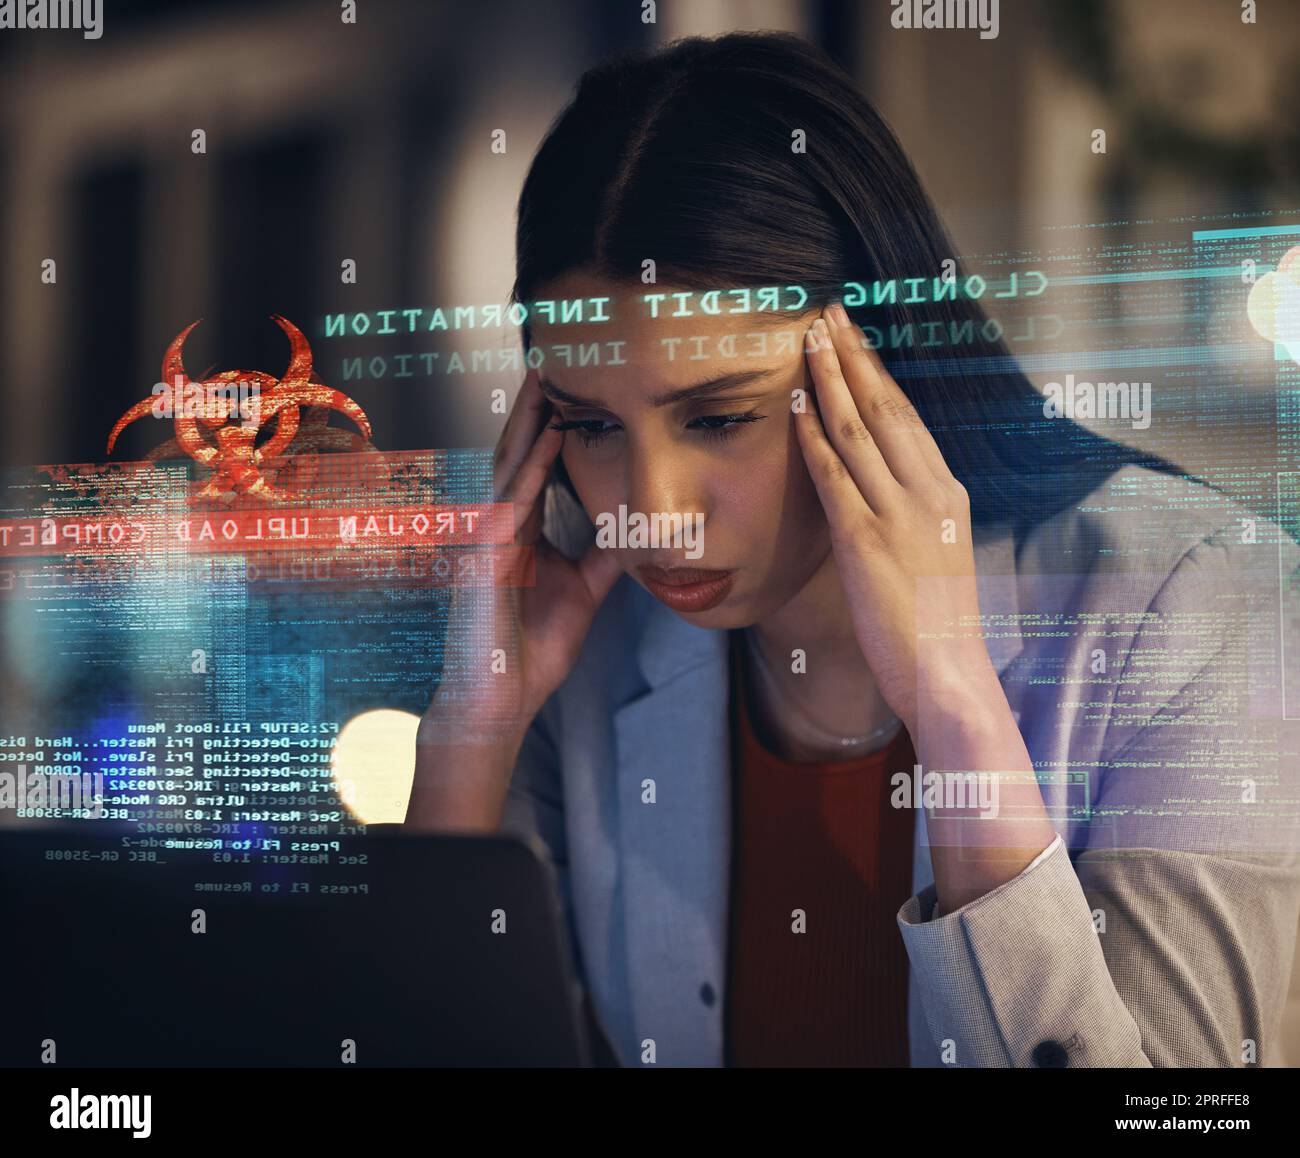 Cyber security, hacking and data analytics employee, tired from working on it, software engineering glitch. Big data, cloud computing and information technology worker with credit database hacker Stock Photo